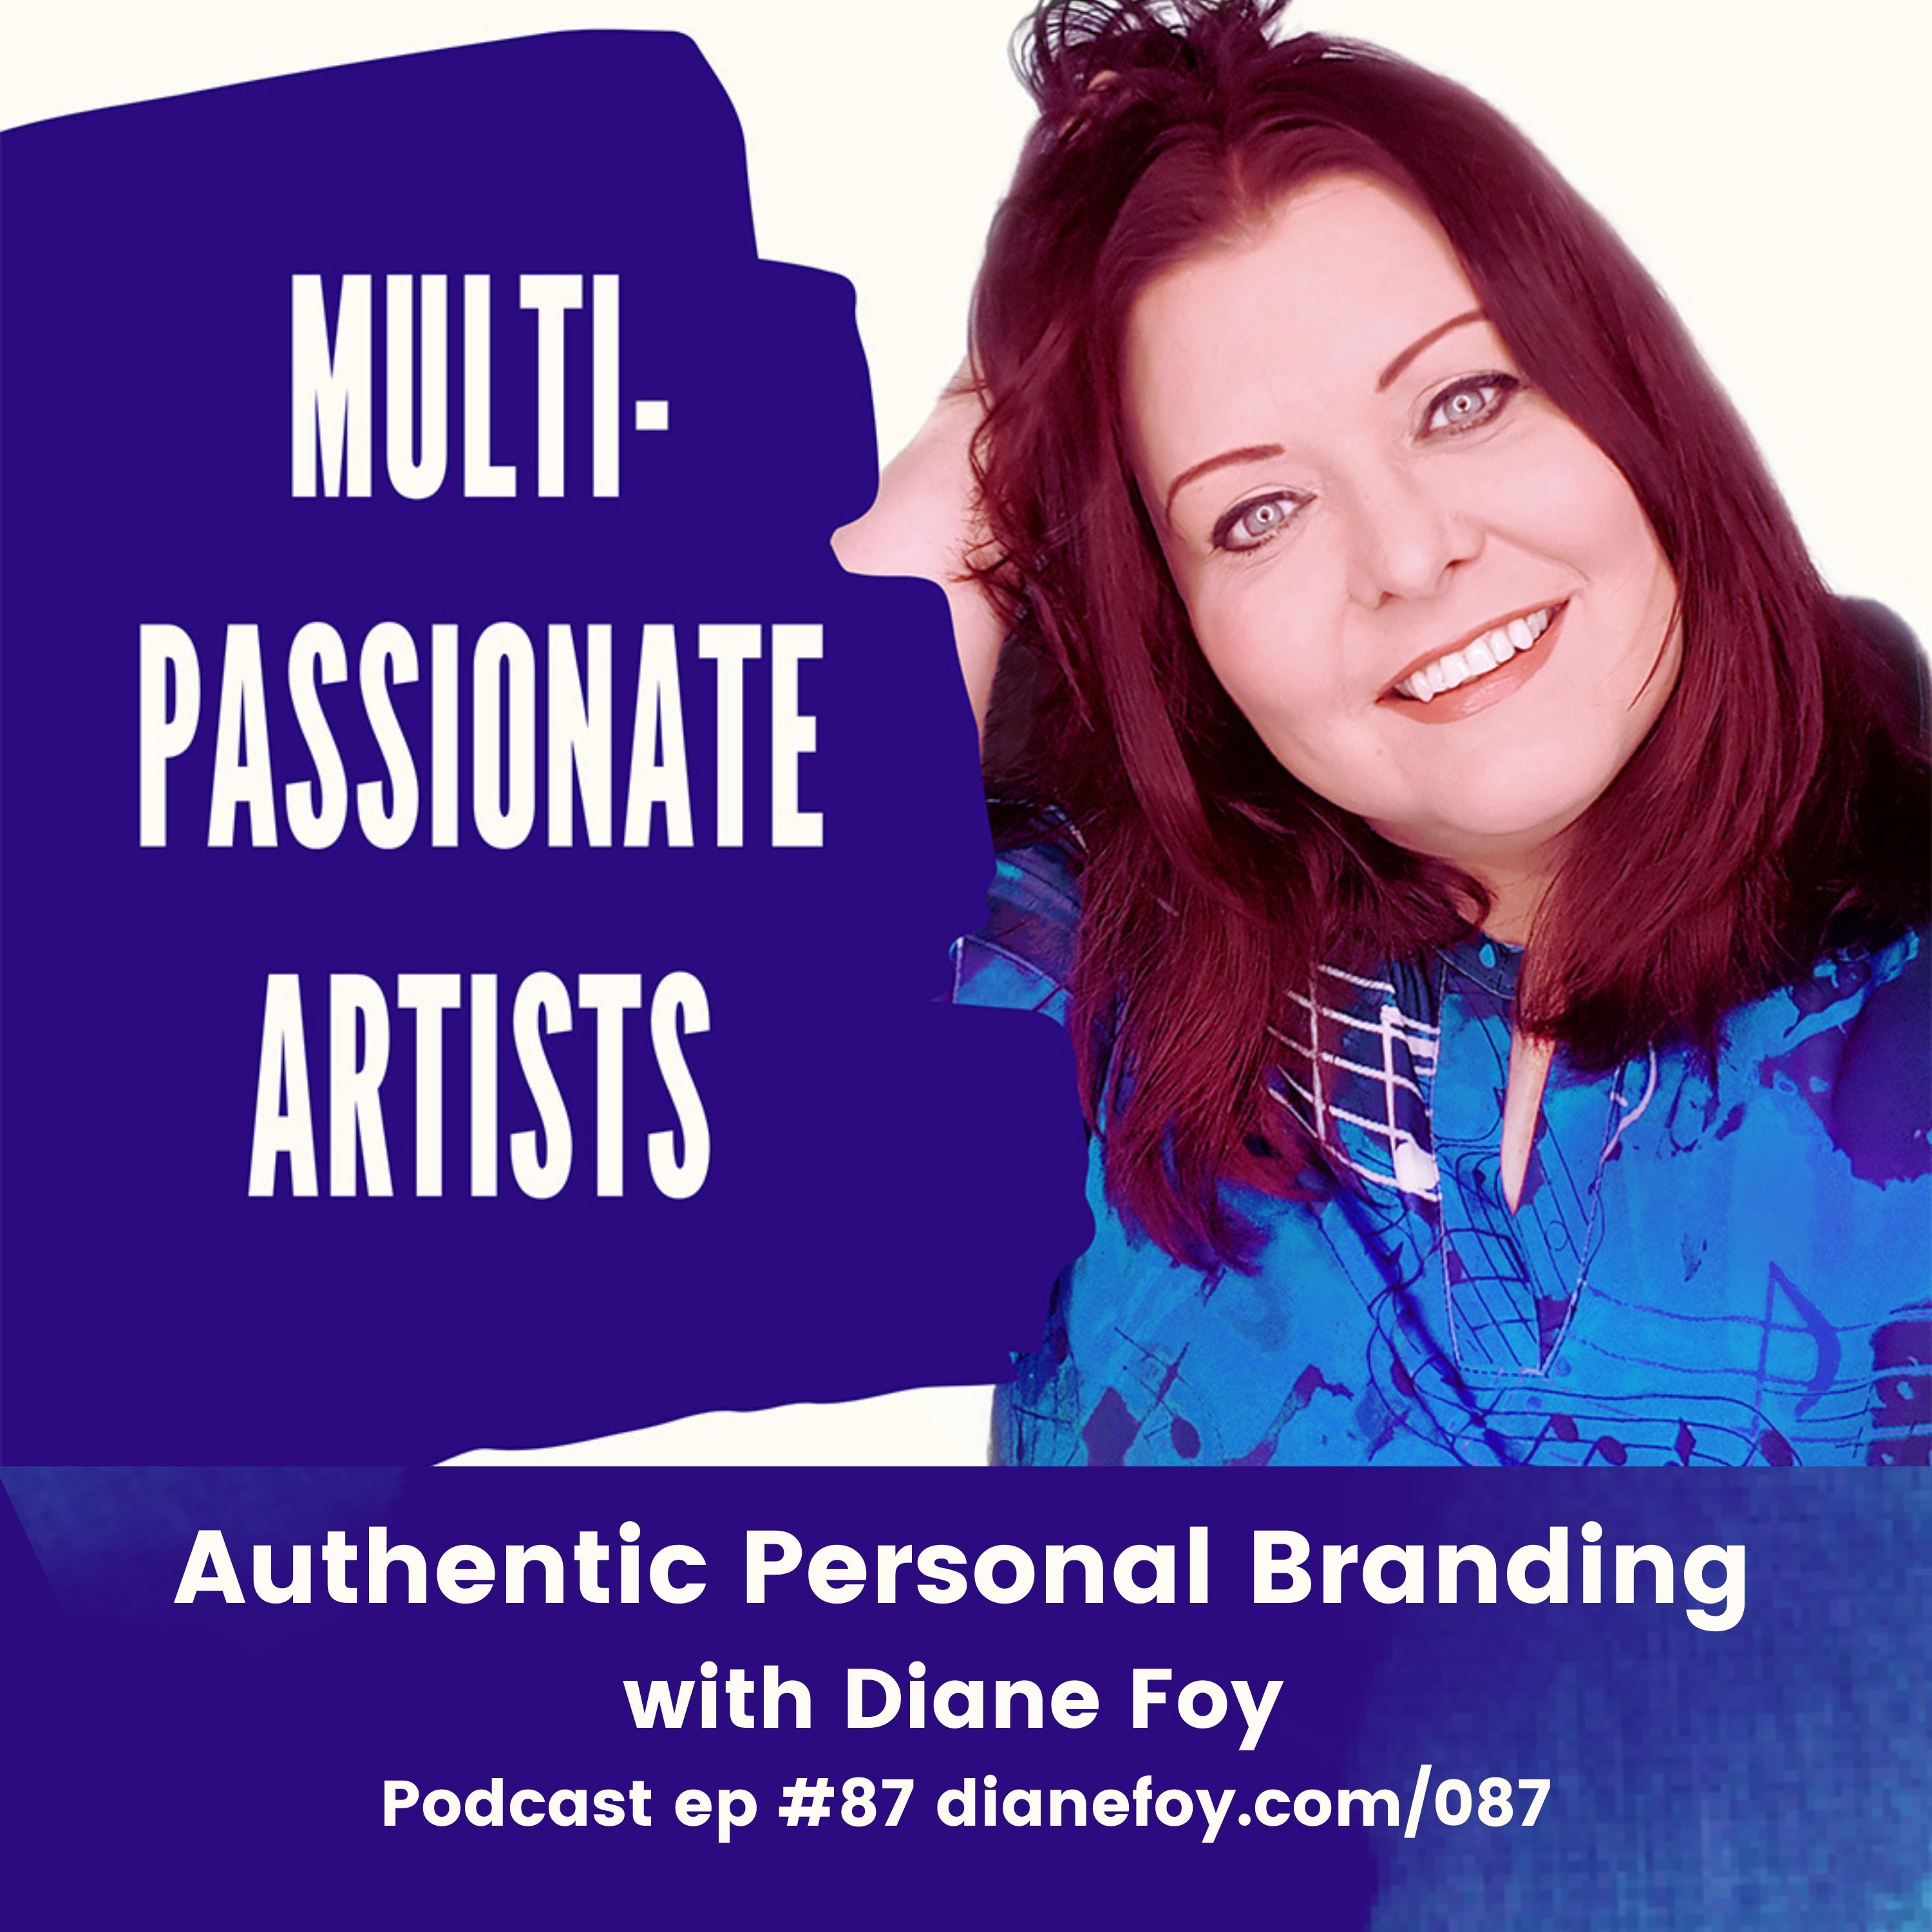 Authentic Personal Branding with Diane Foy